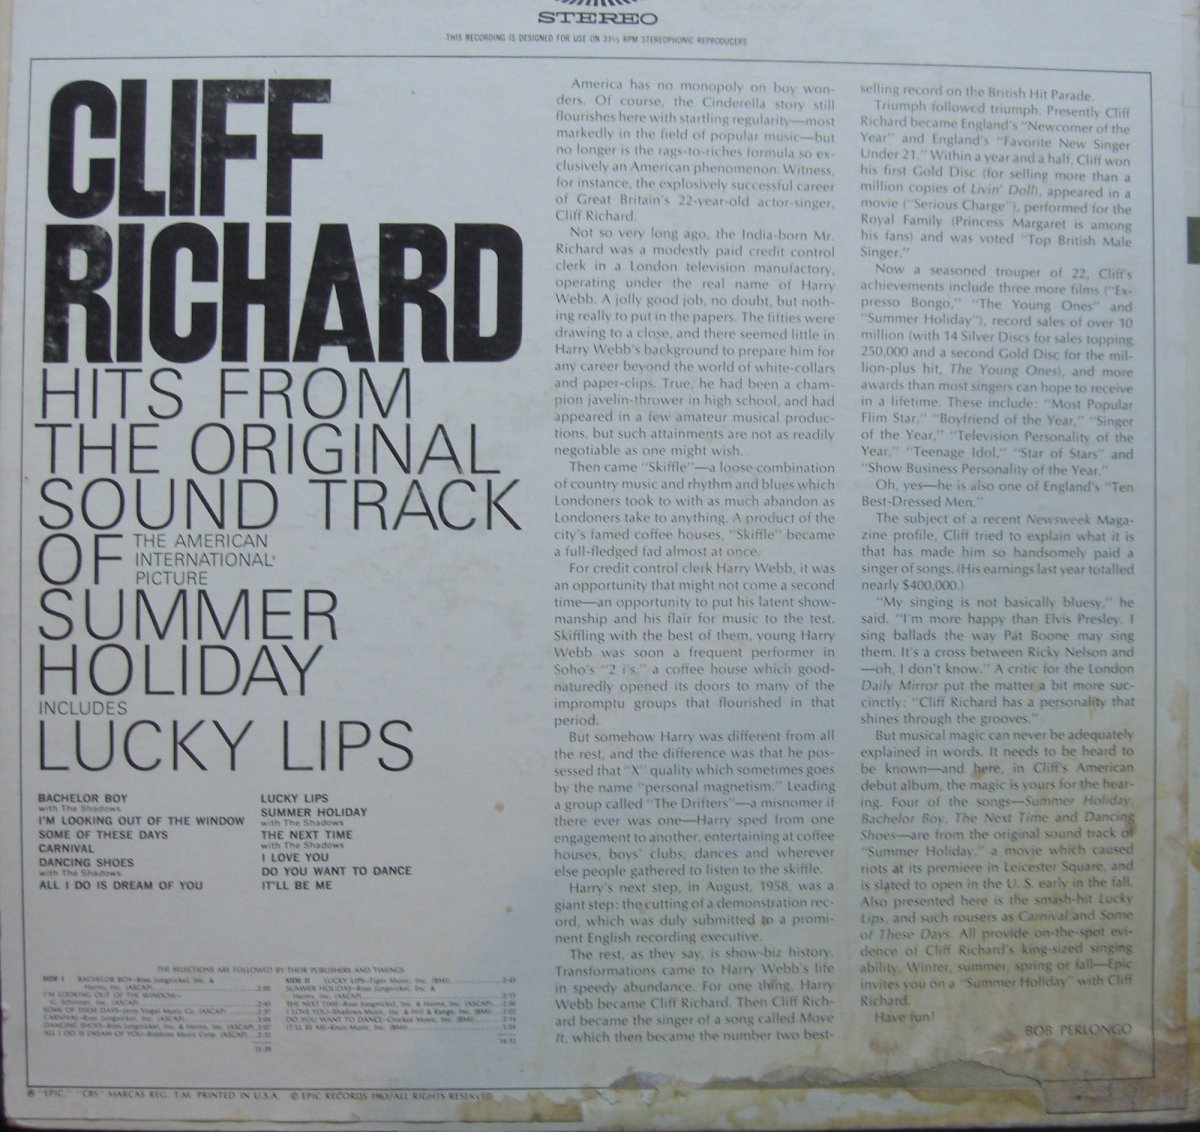 Cliff Richard – Hits From The Original Sound Track Of Summer Holiday